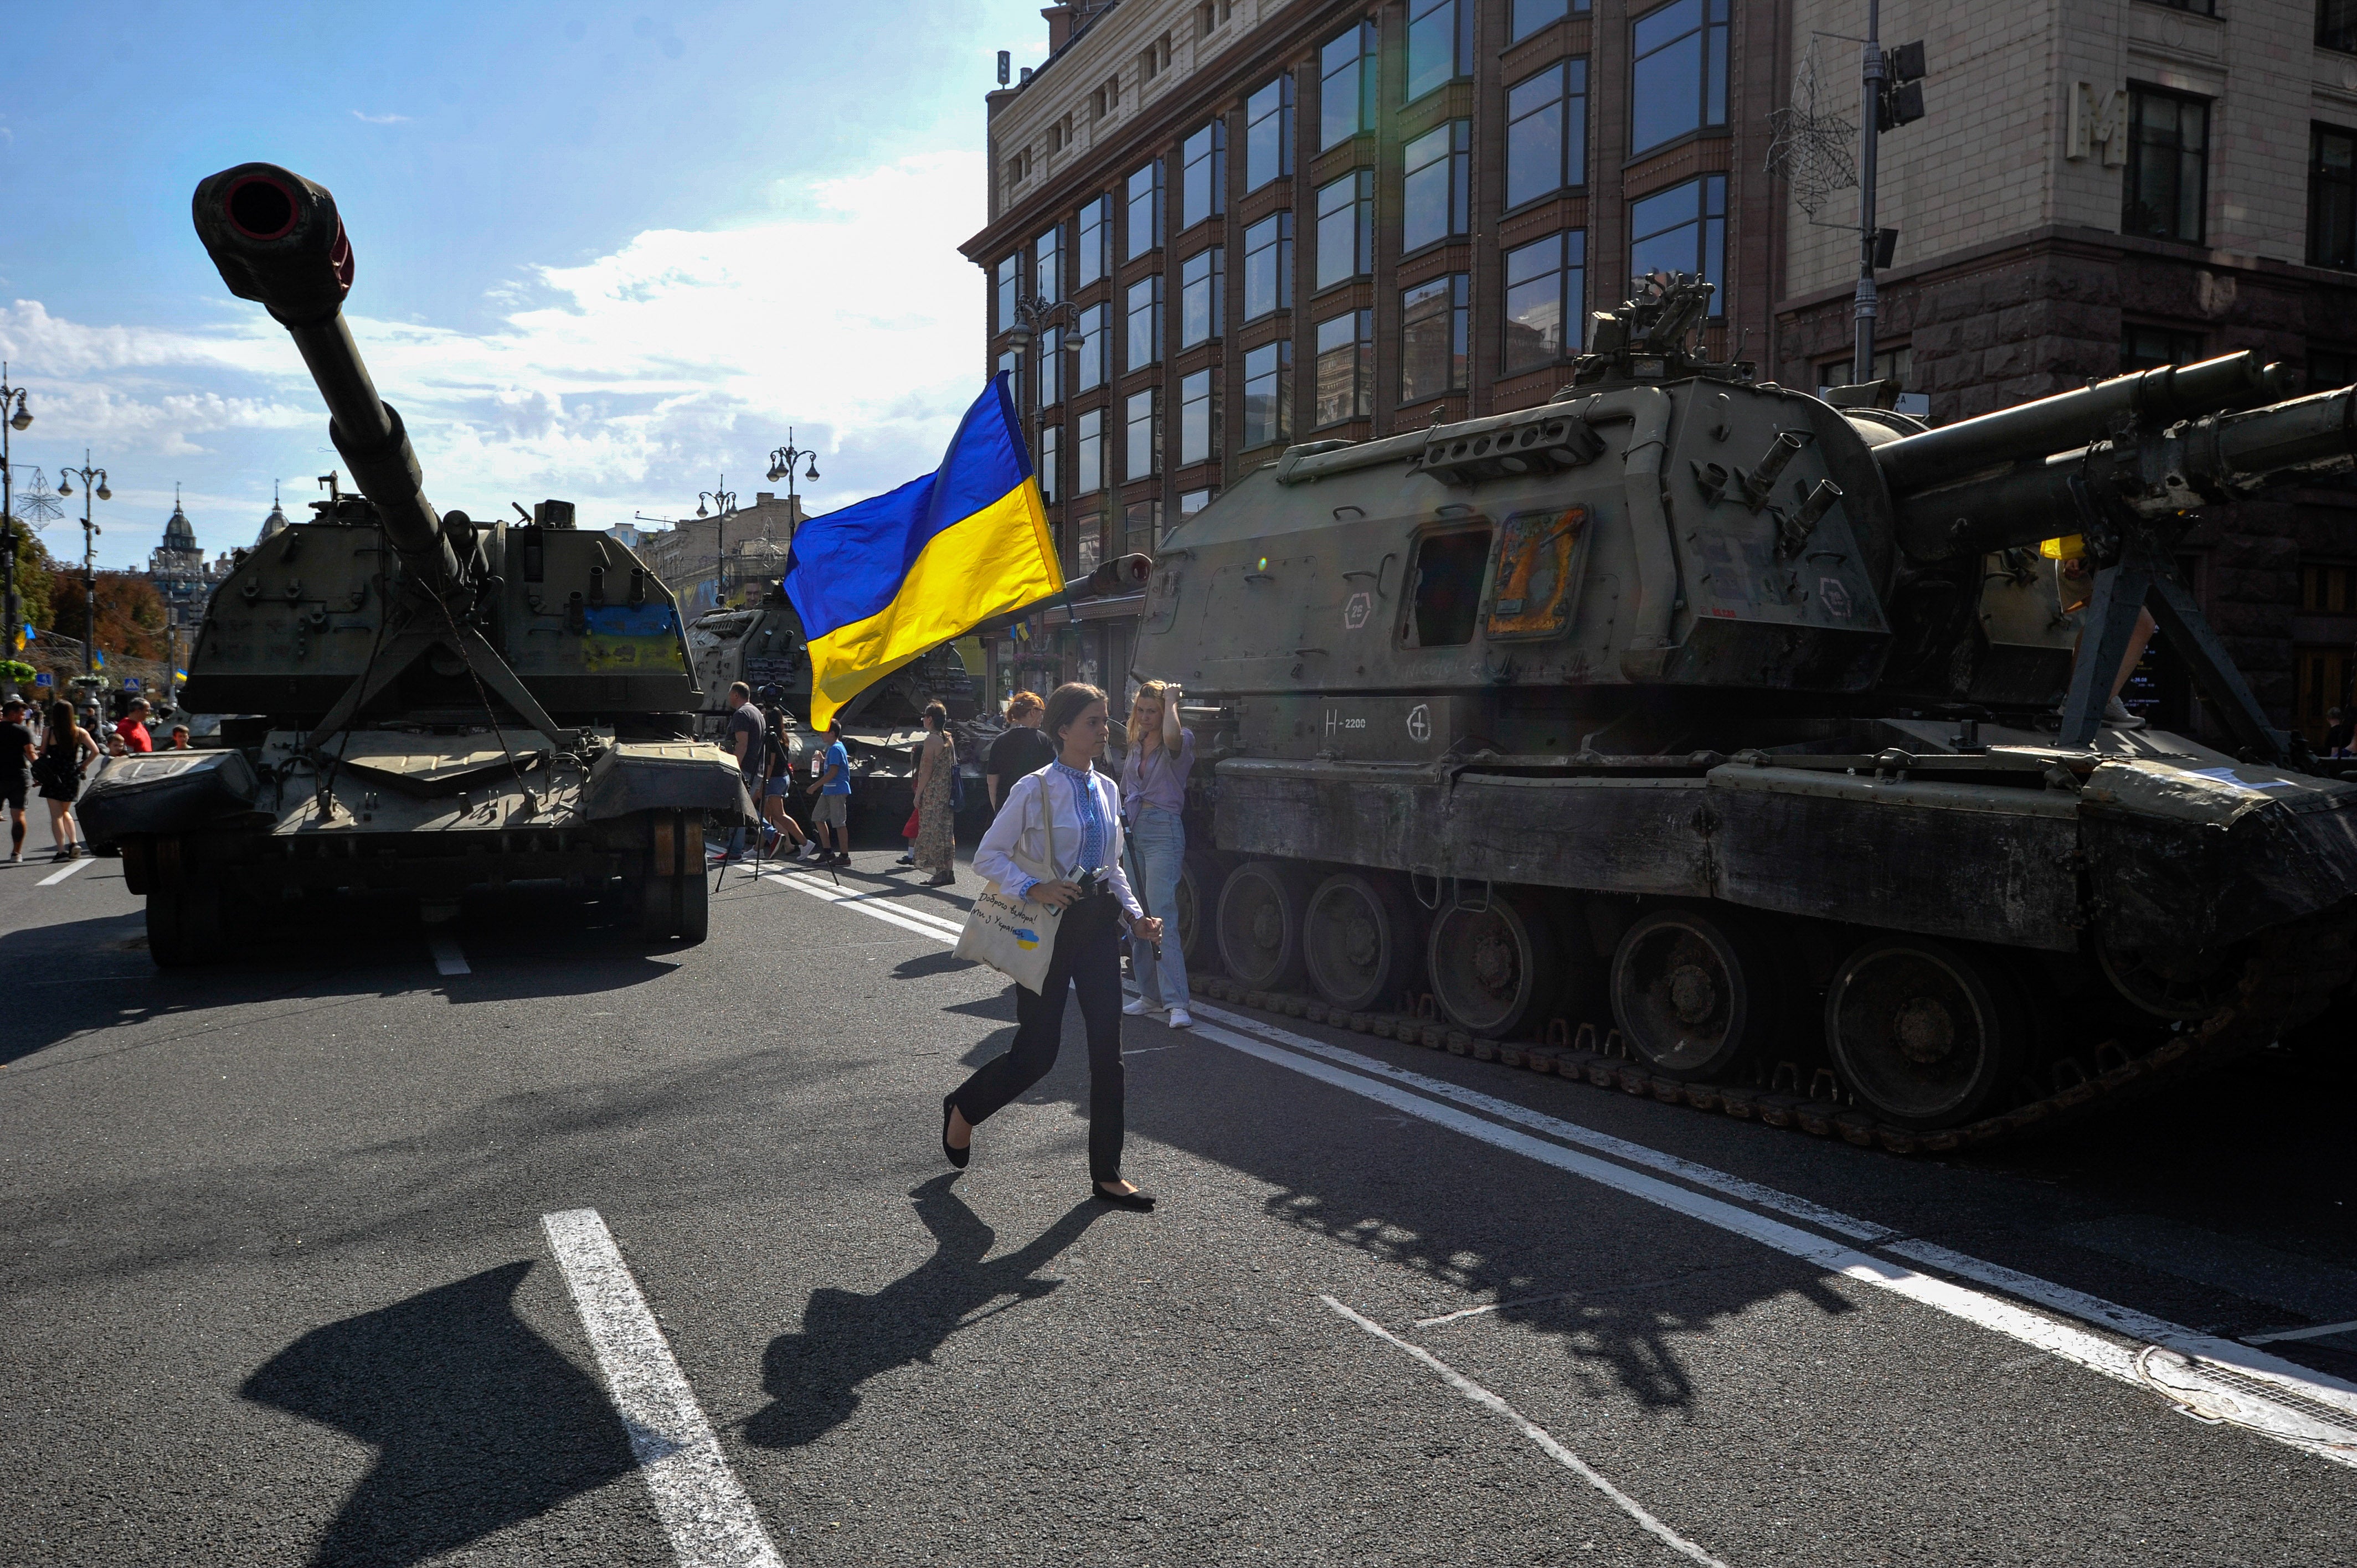 A young girl holds a Ukrainian flag next to destroyed Russian military hardware in Kyiv on 24 August, 2022.